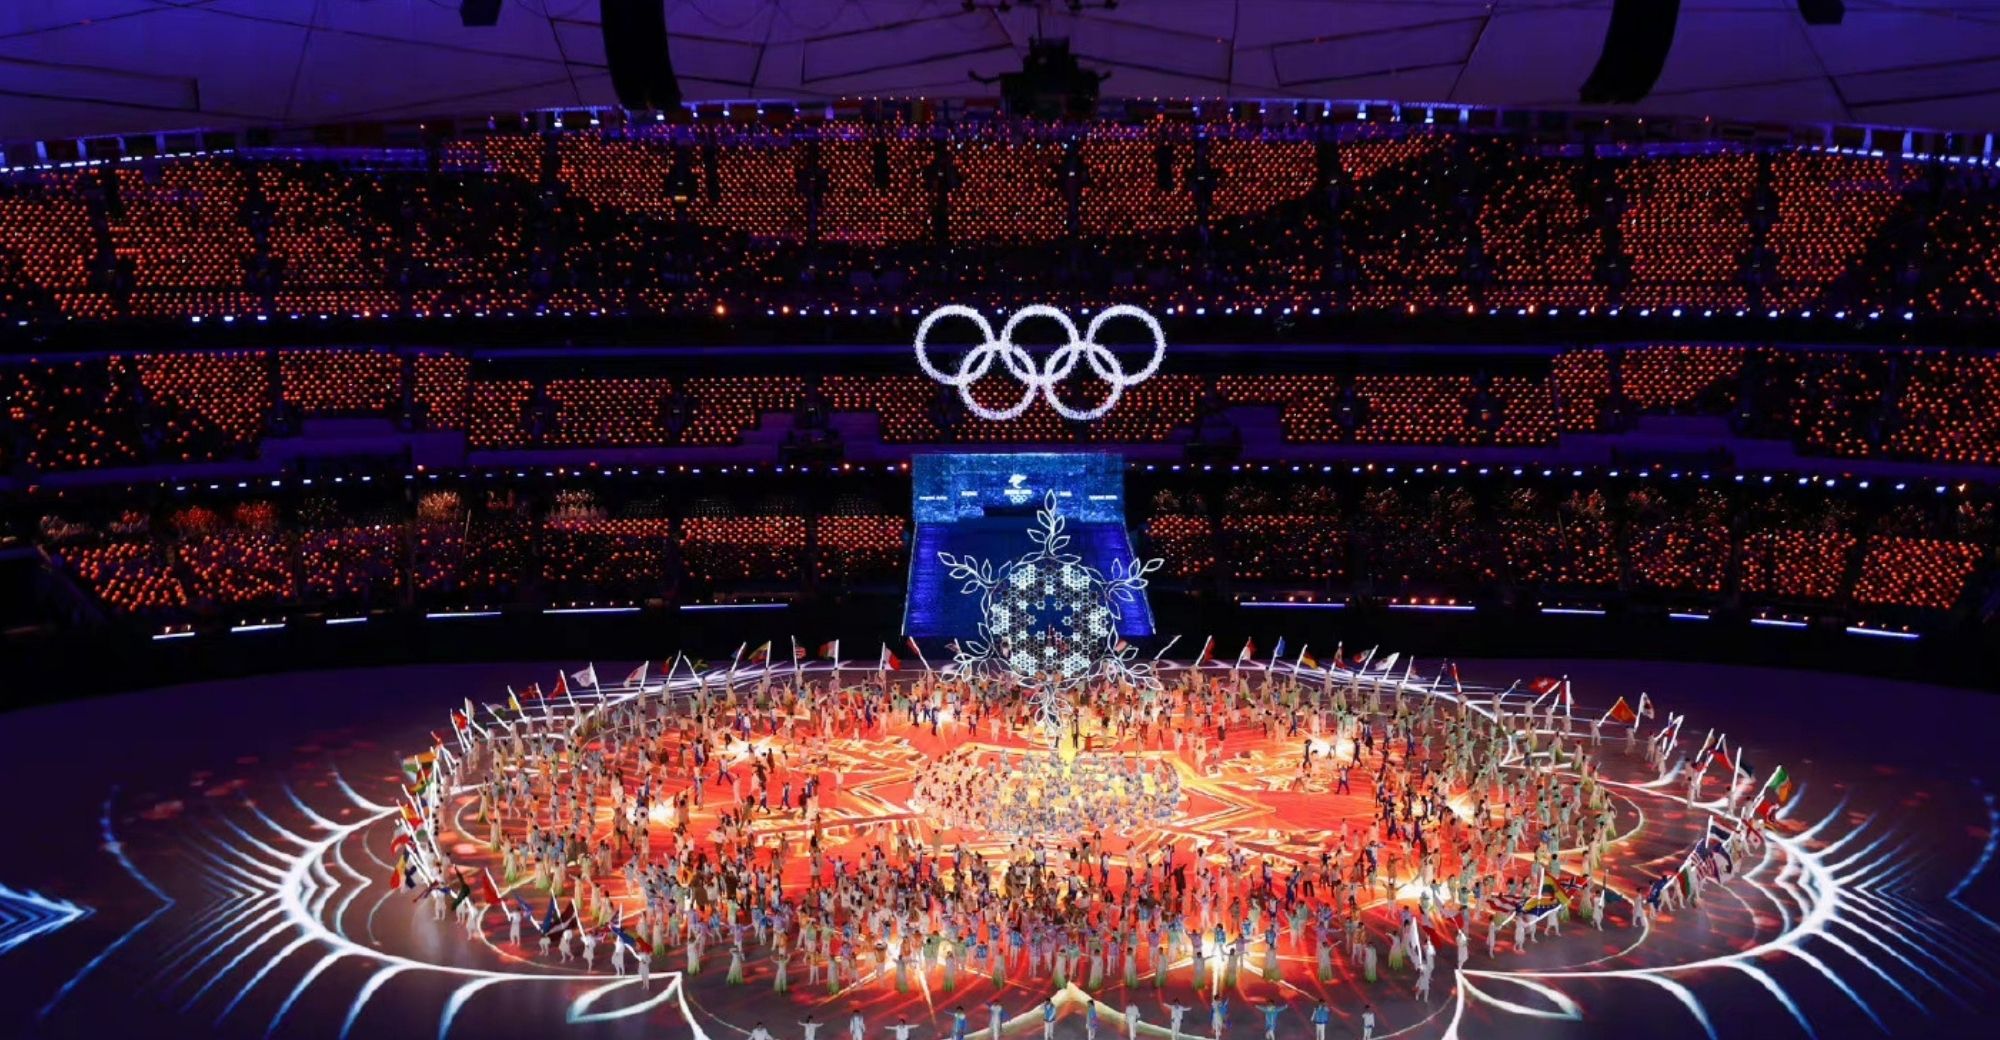 Beijing Winter Olympics Closing Ceremony Highlights Technology and Philosophy